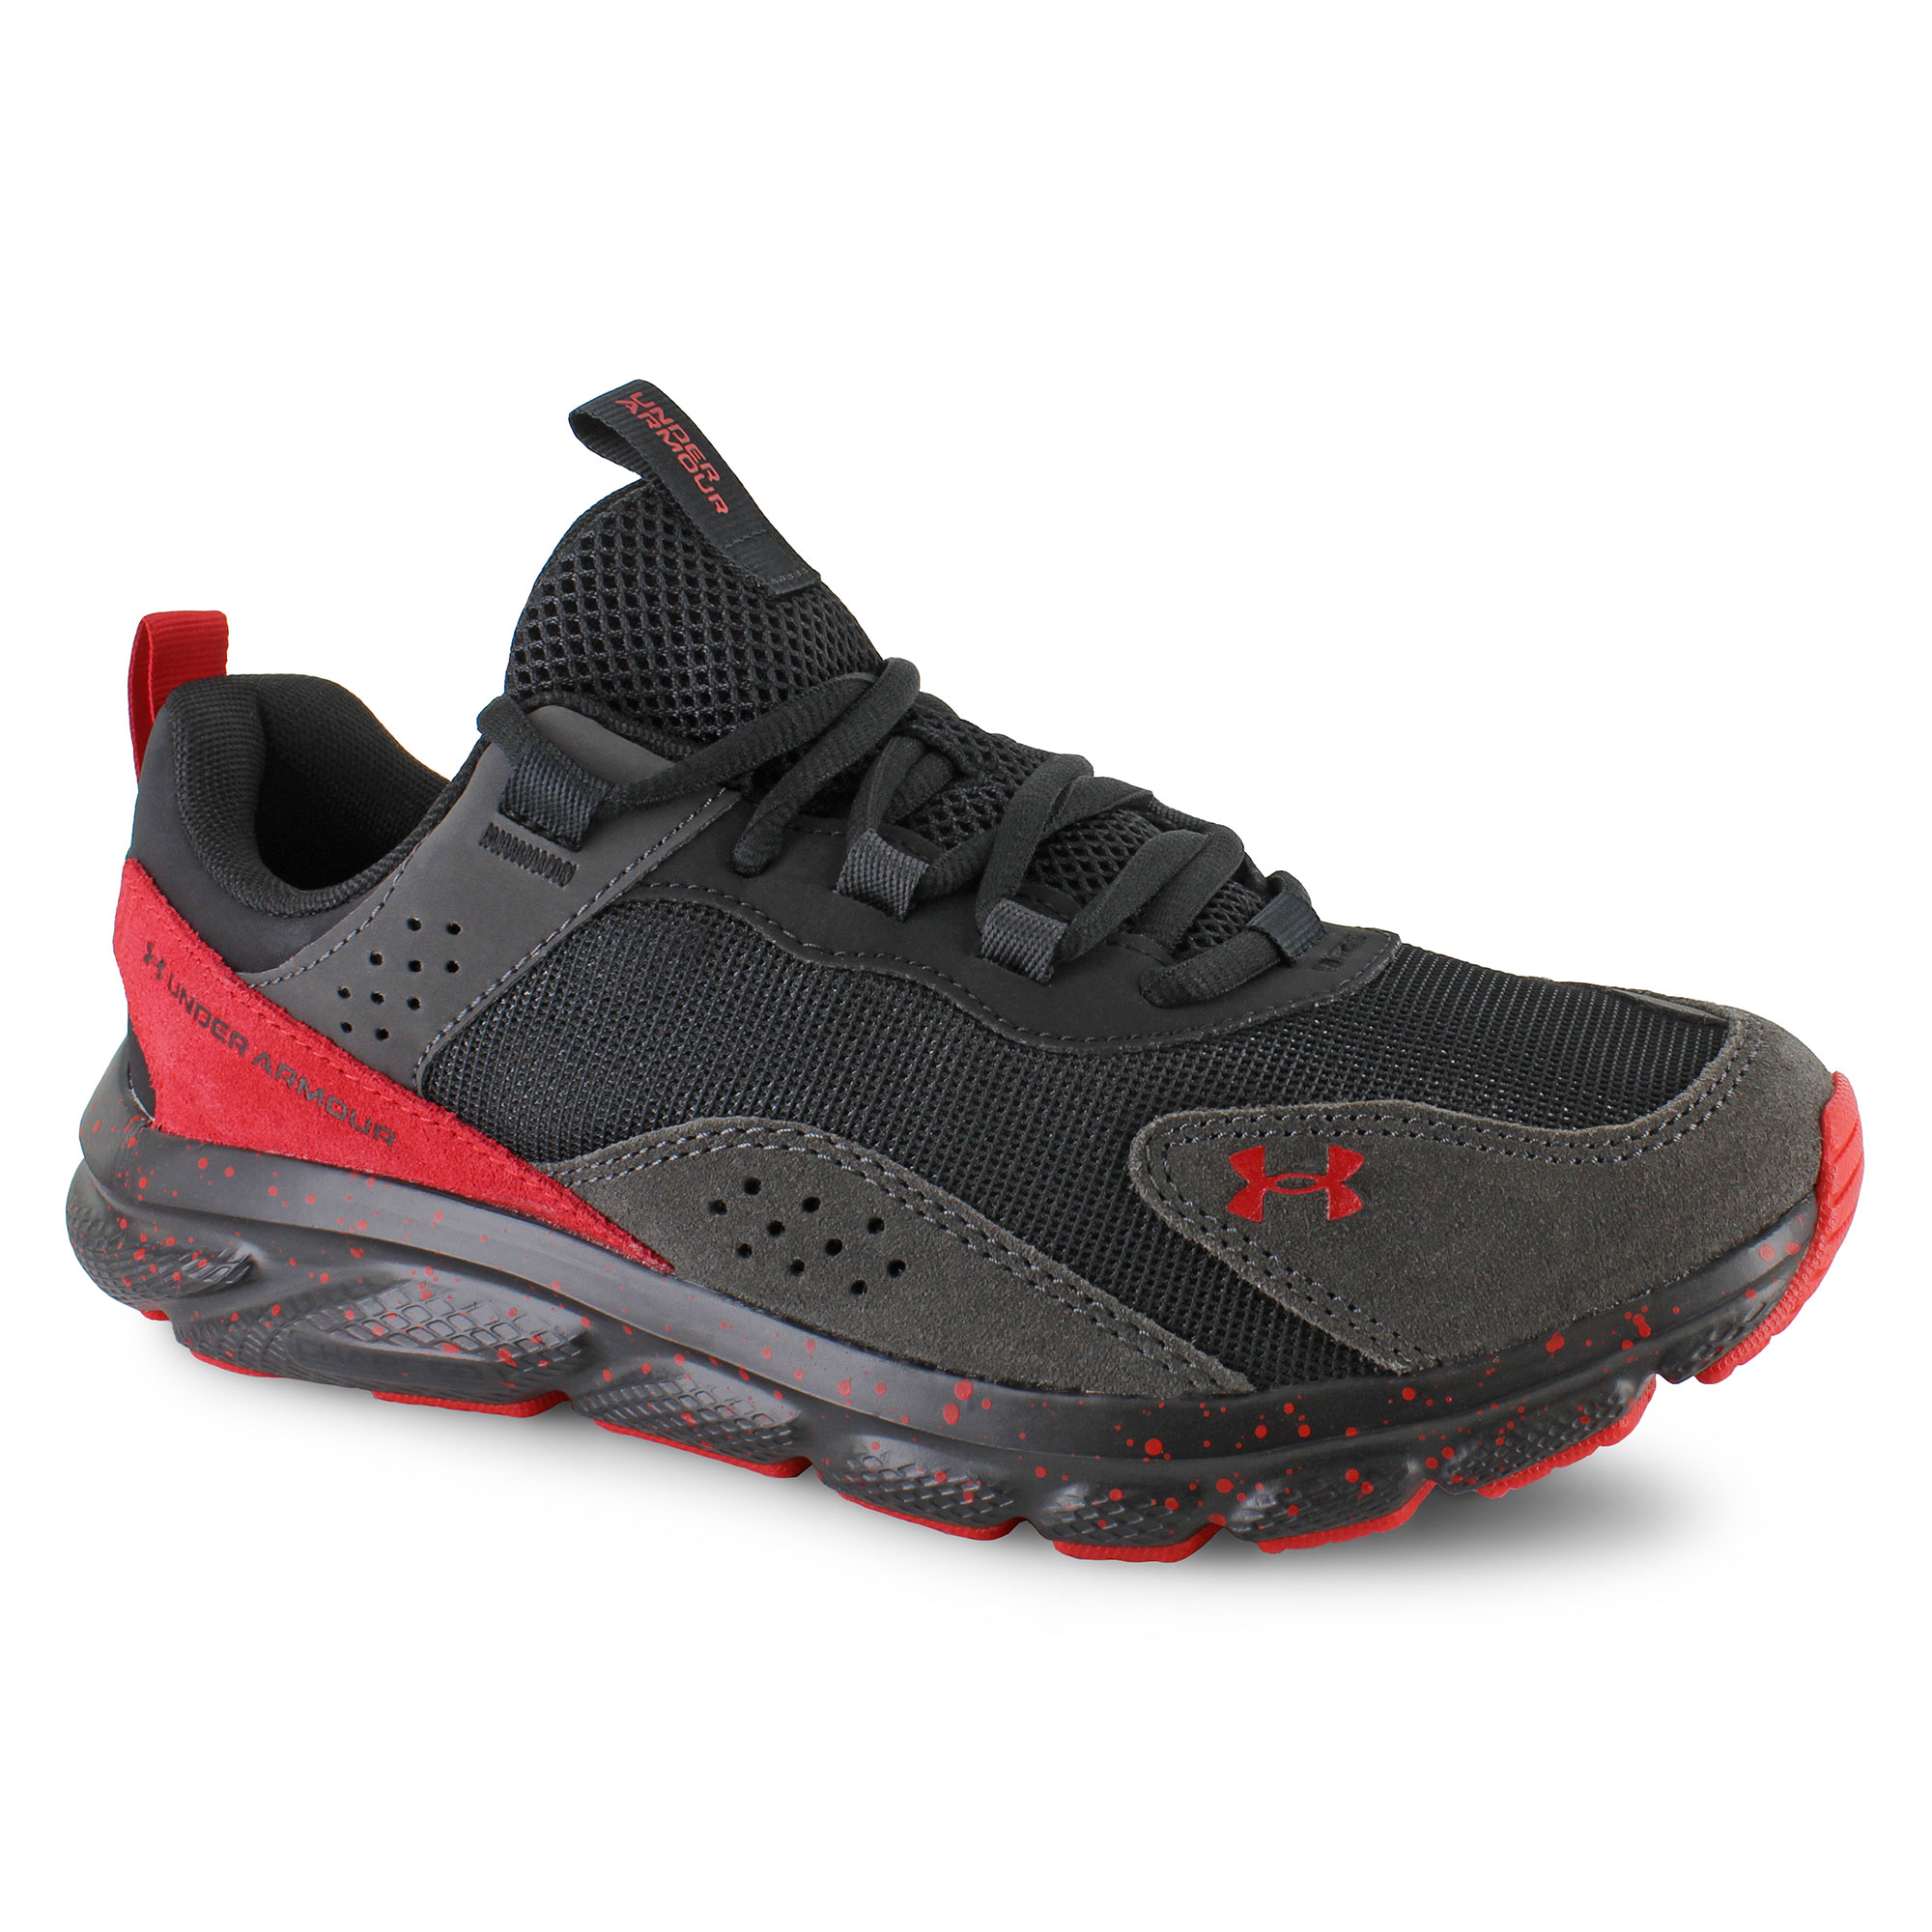 Under Armour Charged Verssert Speckle